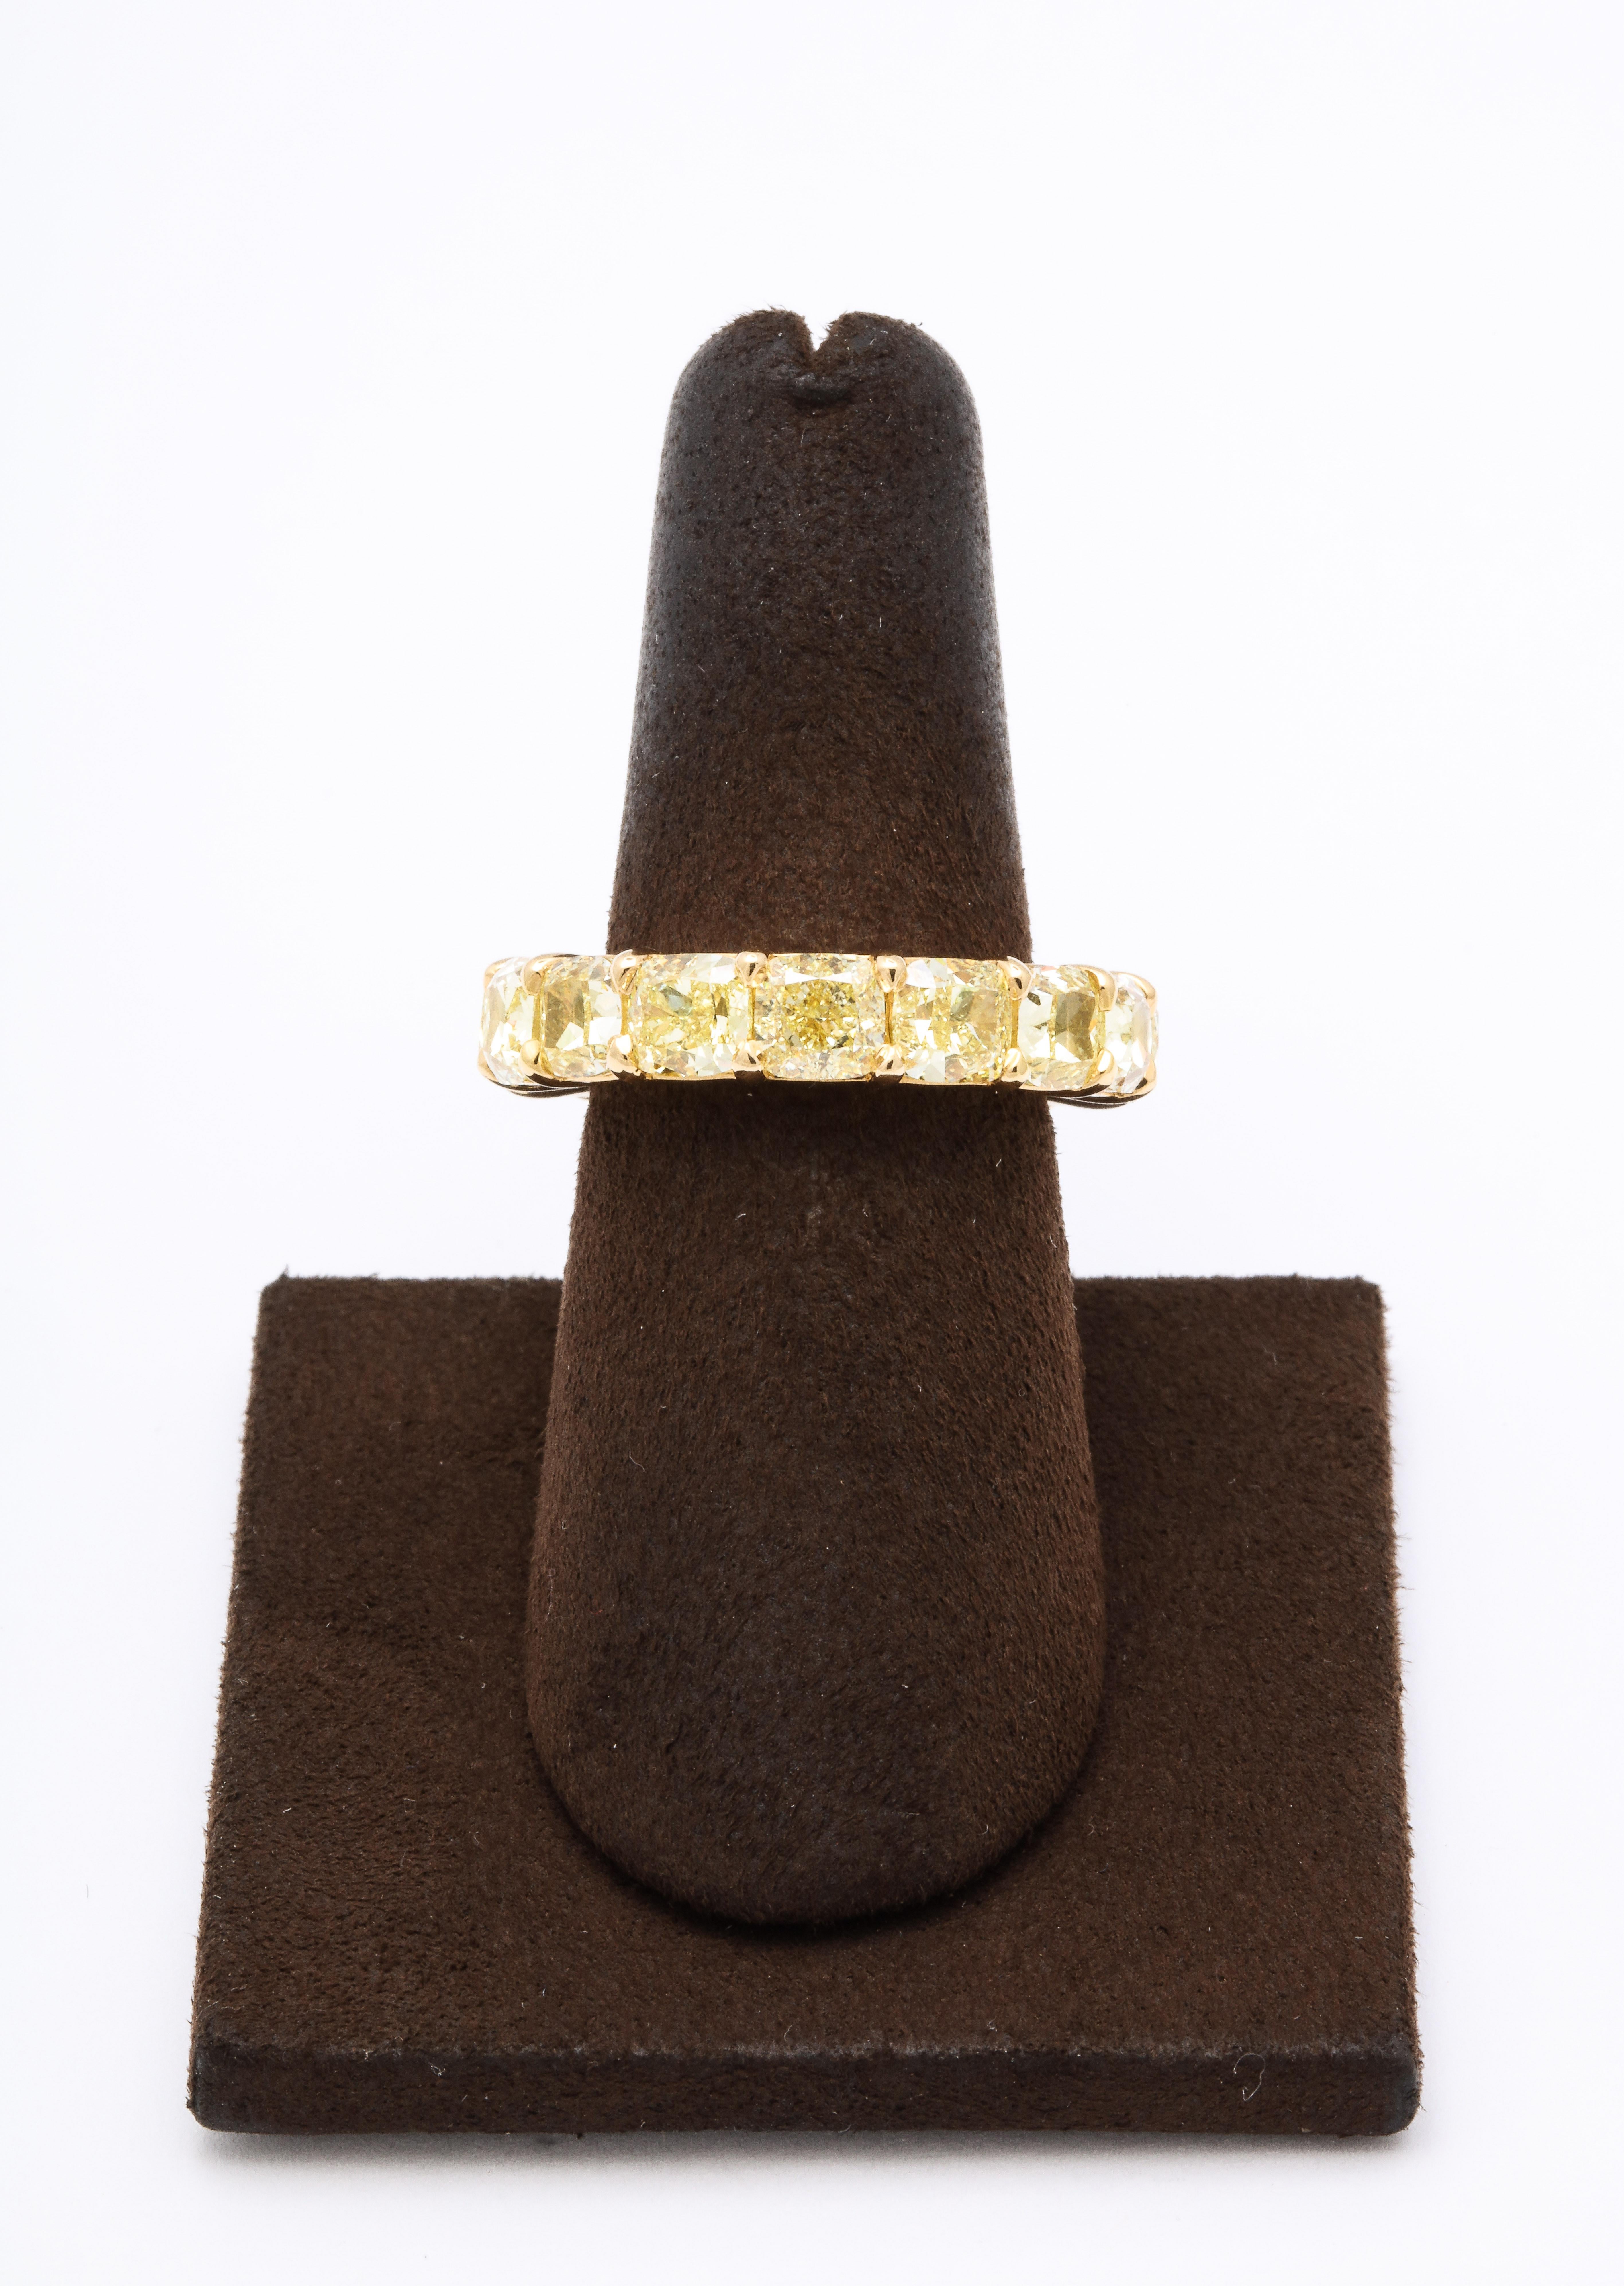 
A beautiful yellow diamond eternity band set with cushion cut diamonds. 

12.15 carats of Fancy Yellow VS diamonds set in 18k yellow gold. 

This ring stands alone and looks fabulous stacked with other bands. 

Size 6.75, this ring can be slightly